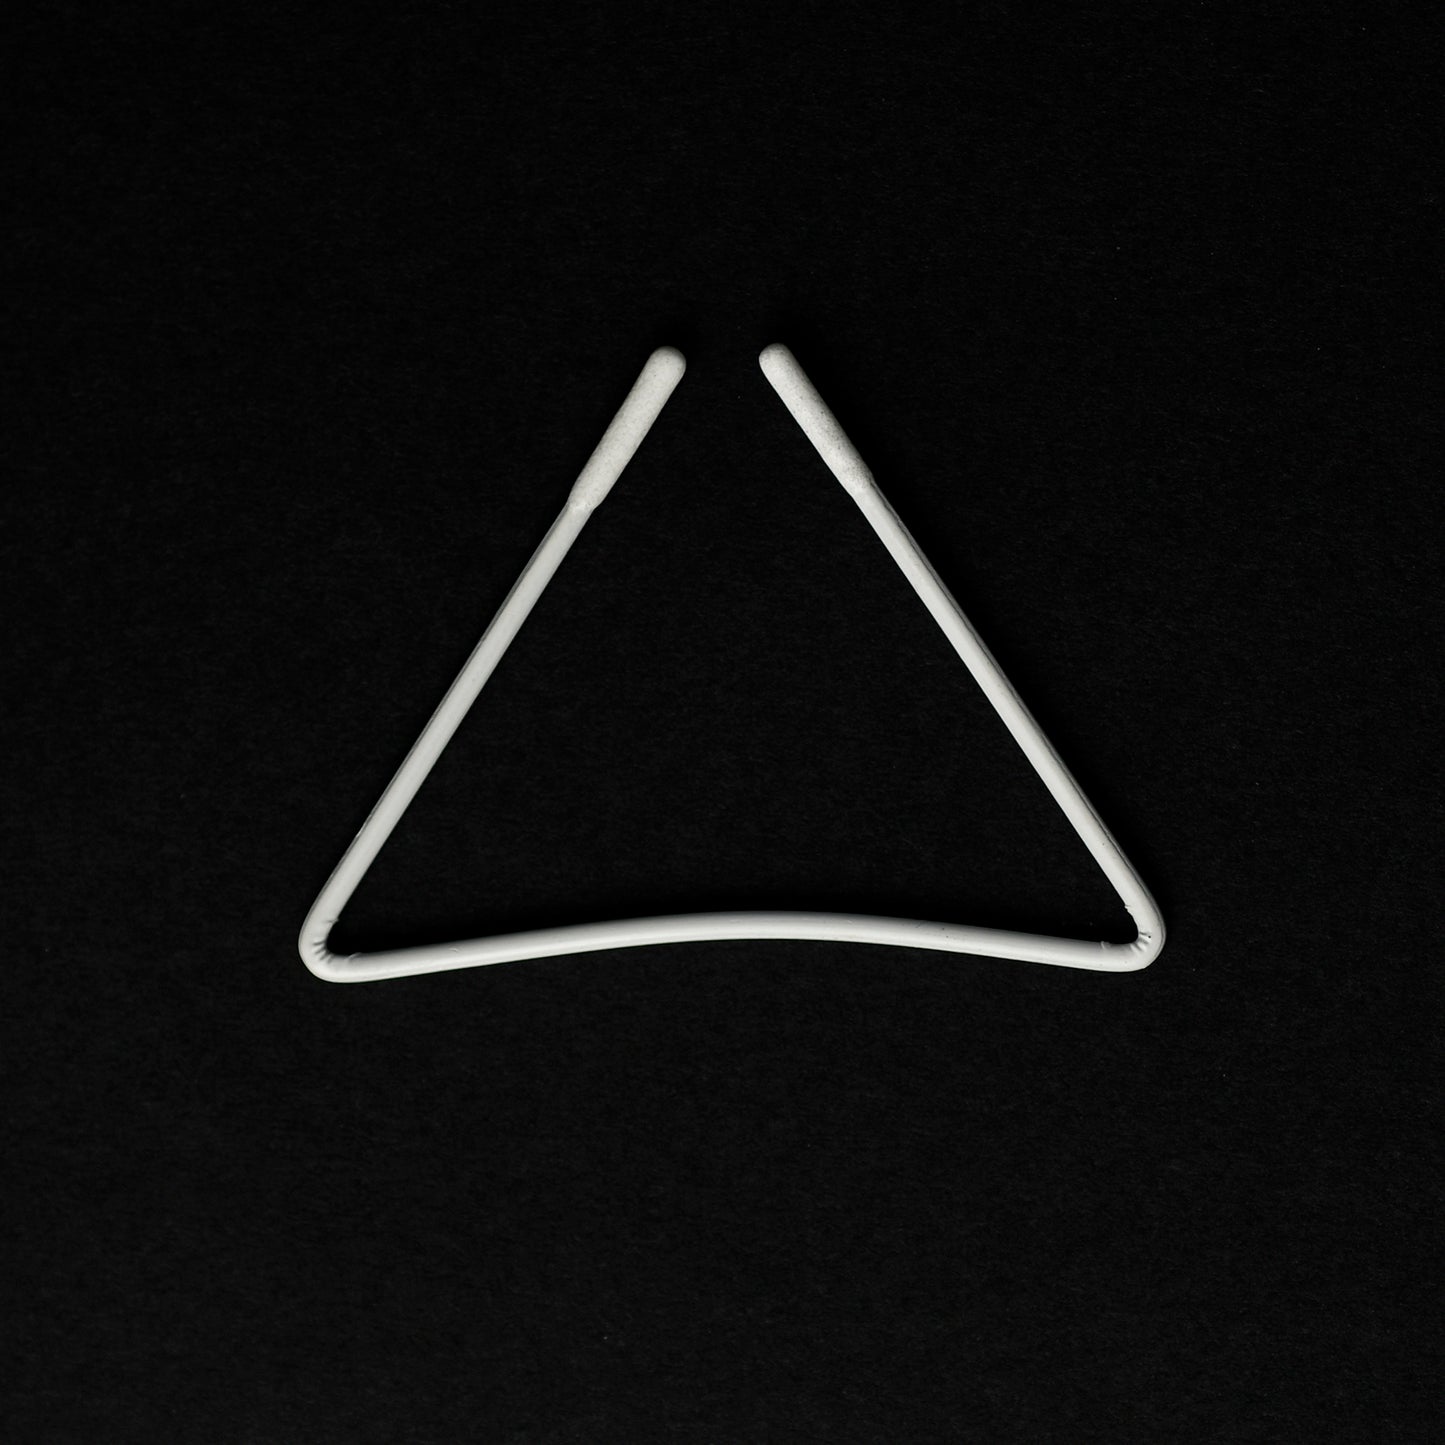 42MM x 58MM NYLON-COATED TRIANGLE CURVED WIRE